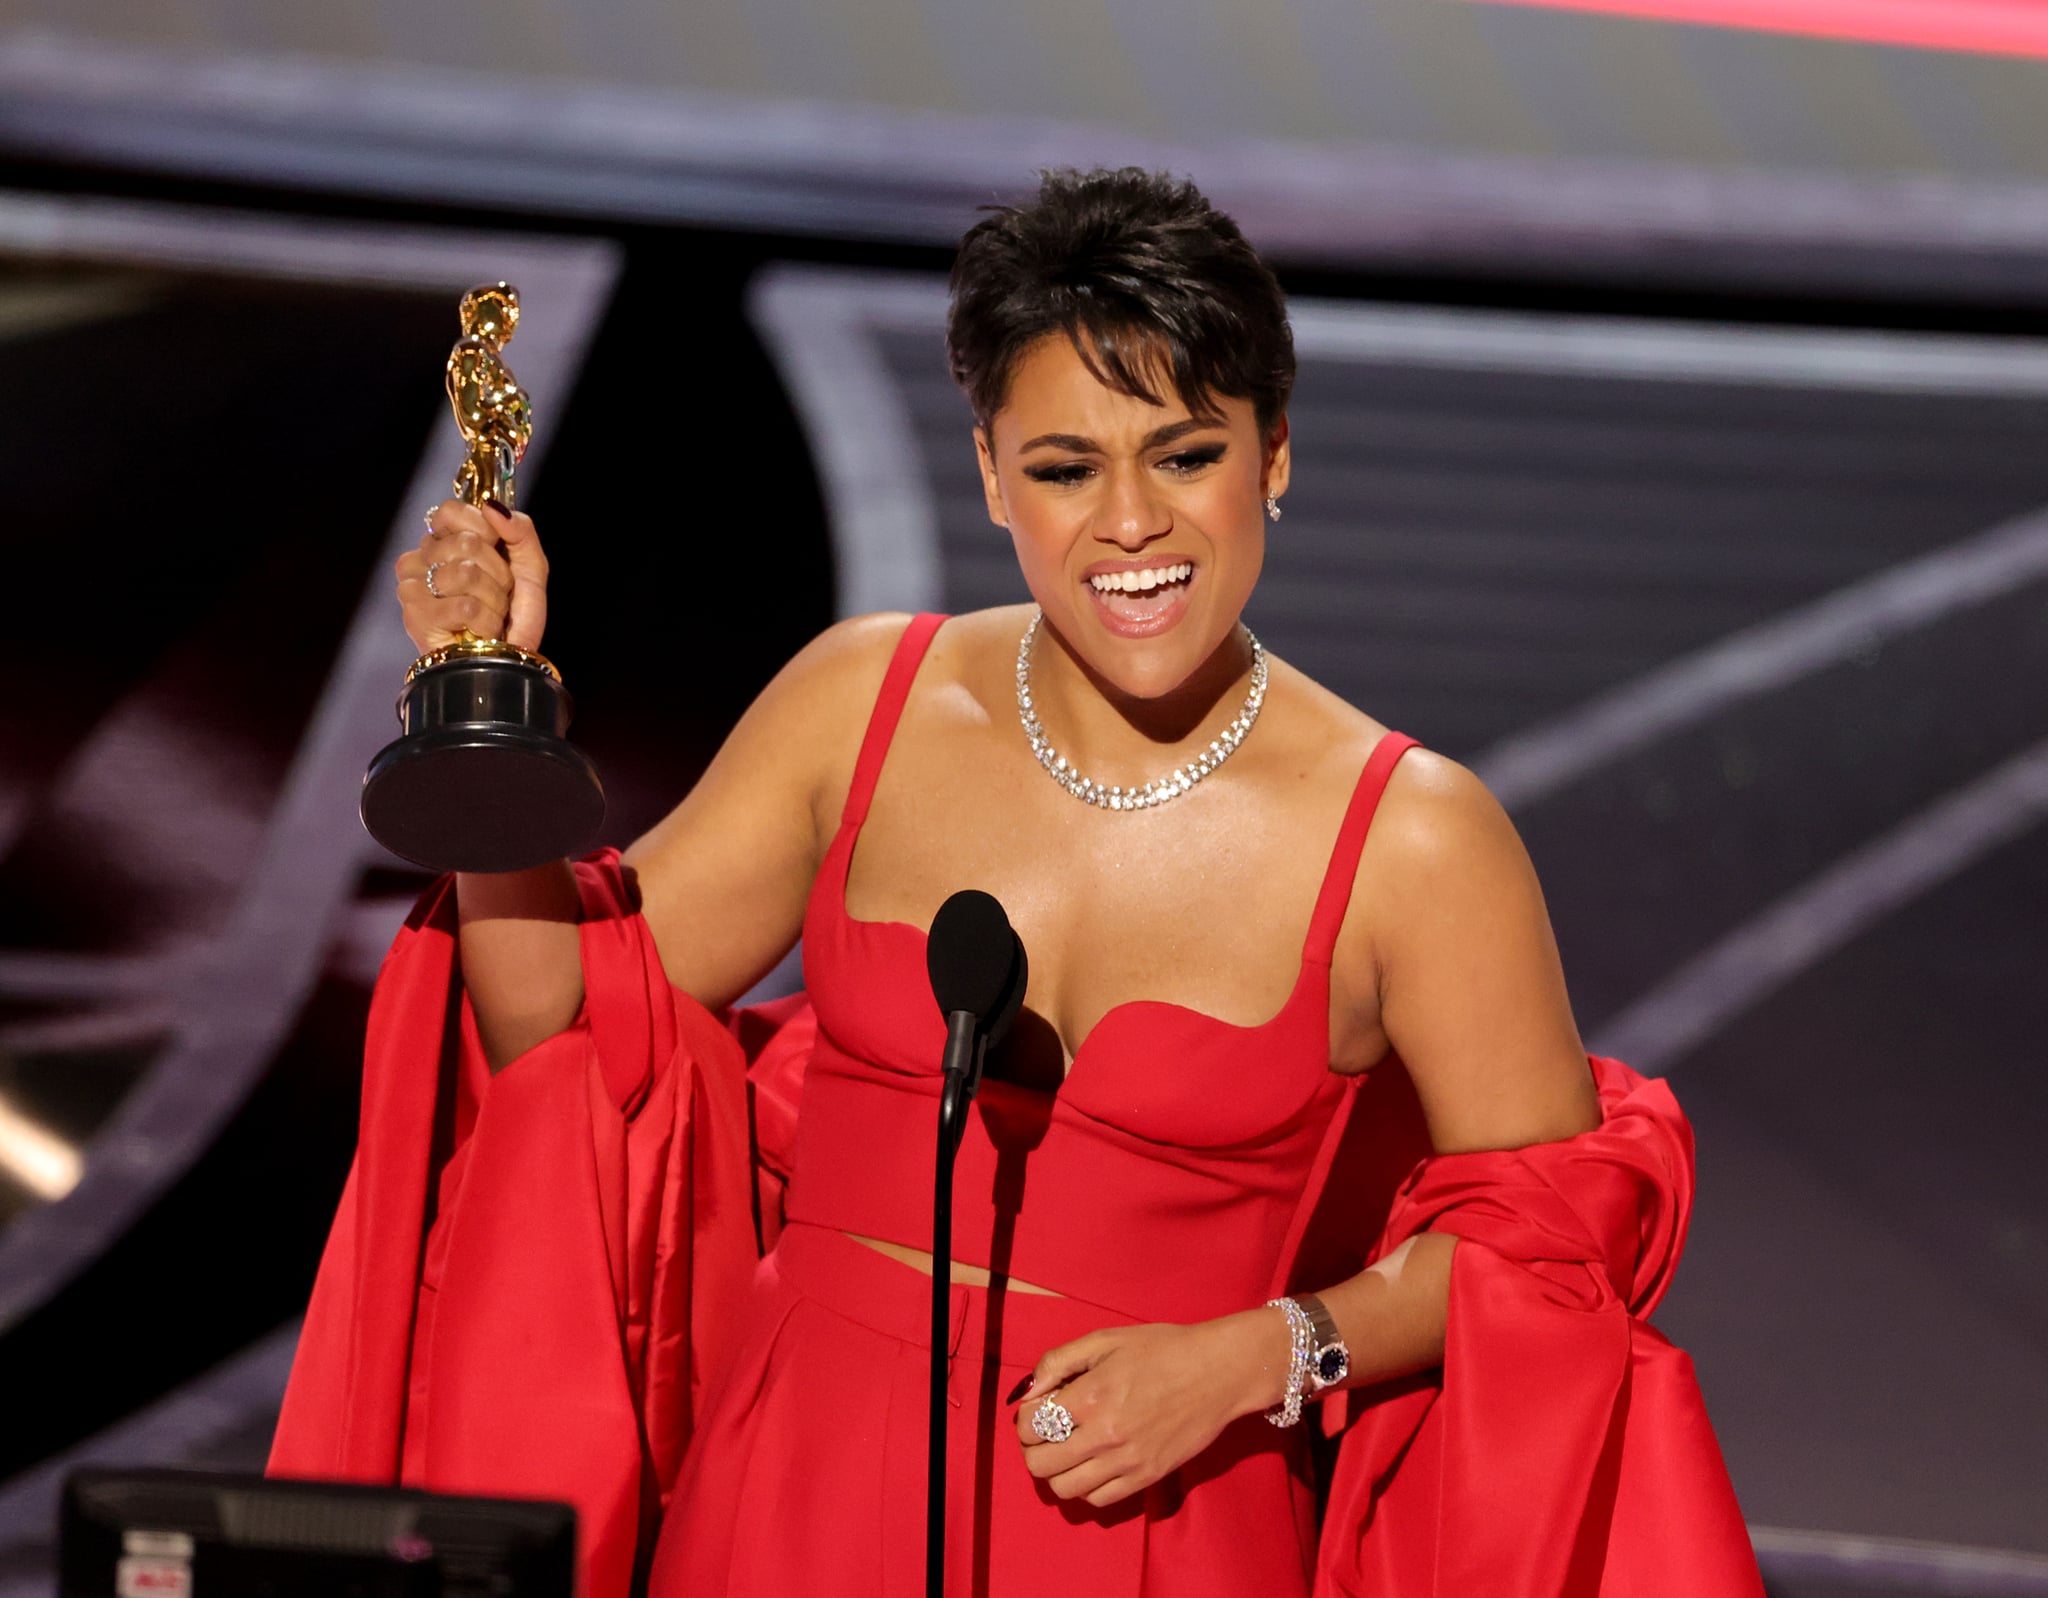 HOLLYWOOD, CALIFORNIA - MARCH 27: Ariana DeBose accepts the Actress in a Supporting Role award for 'West Side Story' onstage during the 94th Annual Academy Awards at Dolby Theatre on March 27, 2022 in Hollywood, California. (Photo by Neilson Barnard/Getty Images)